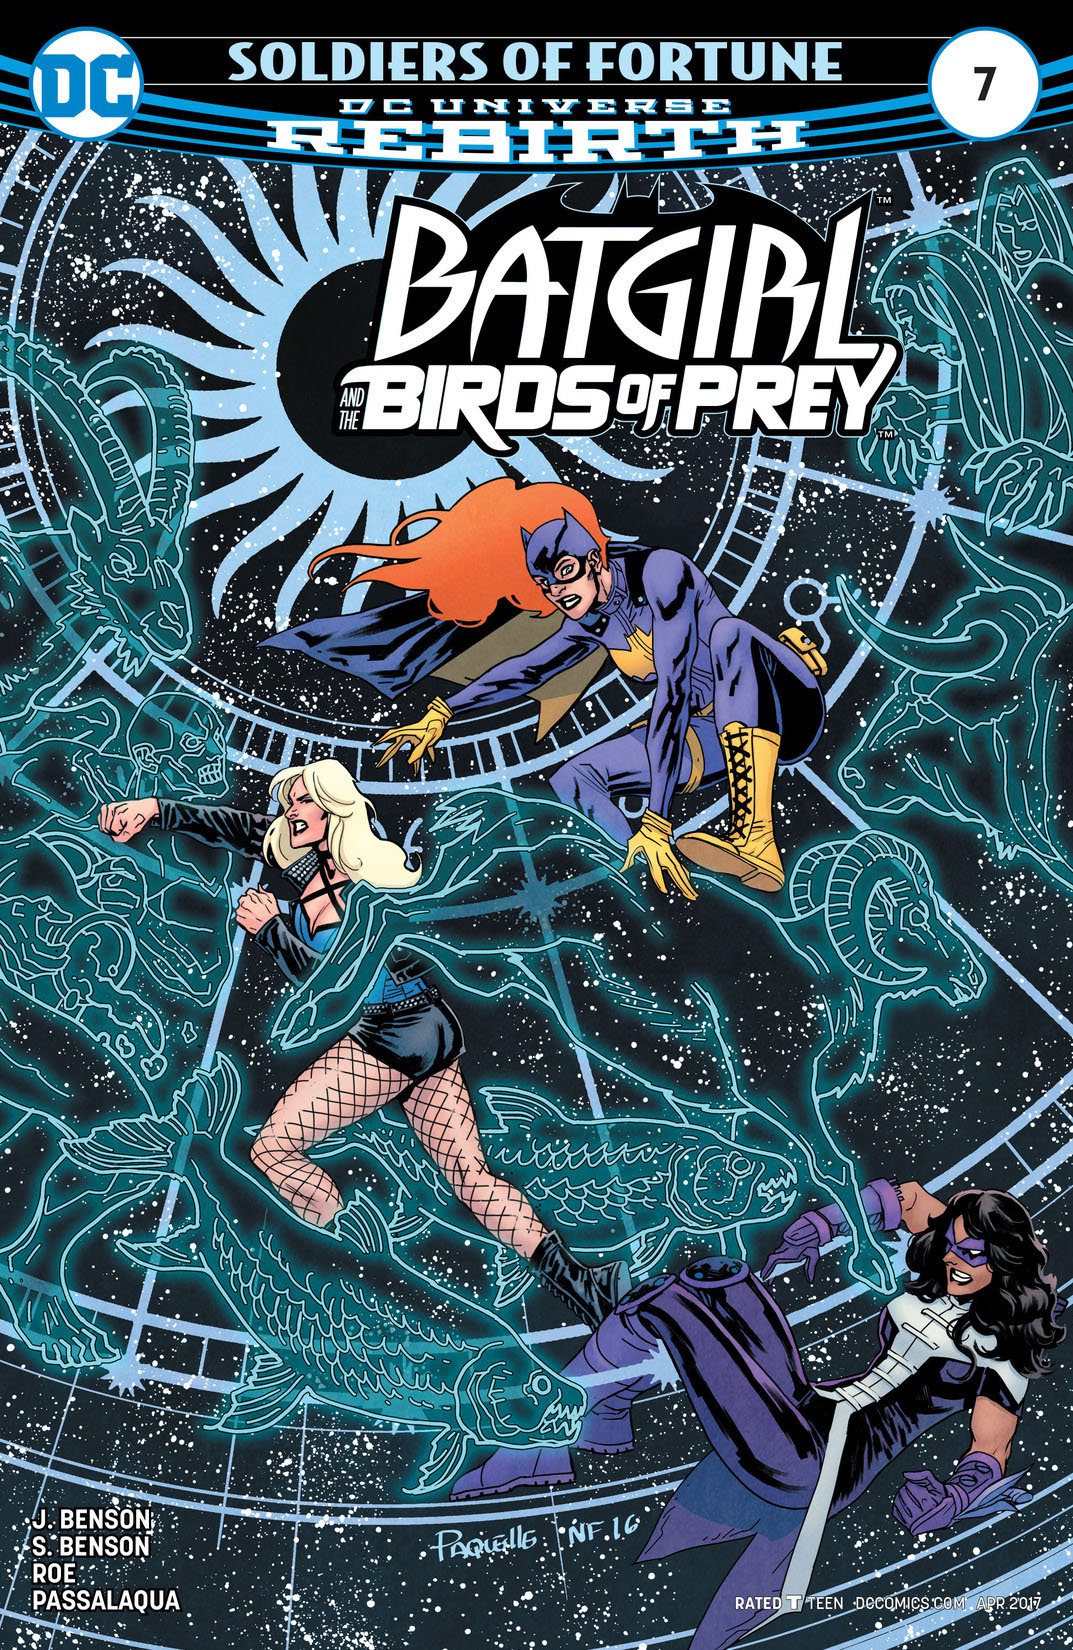 Batgirl and the Birds of Prey #7 preview images